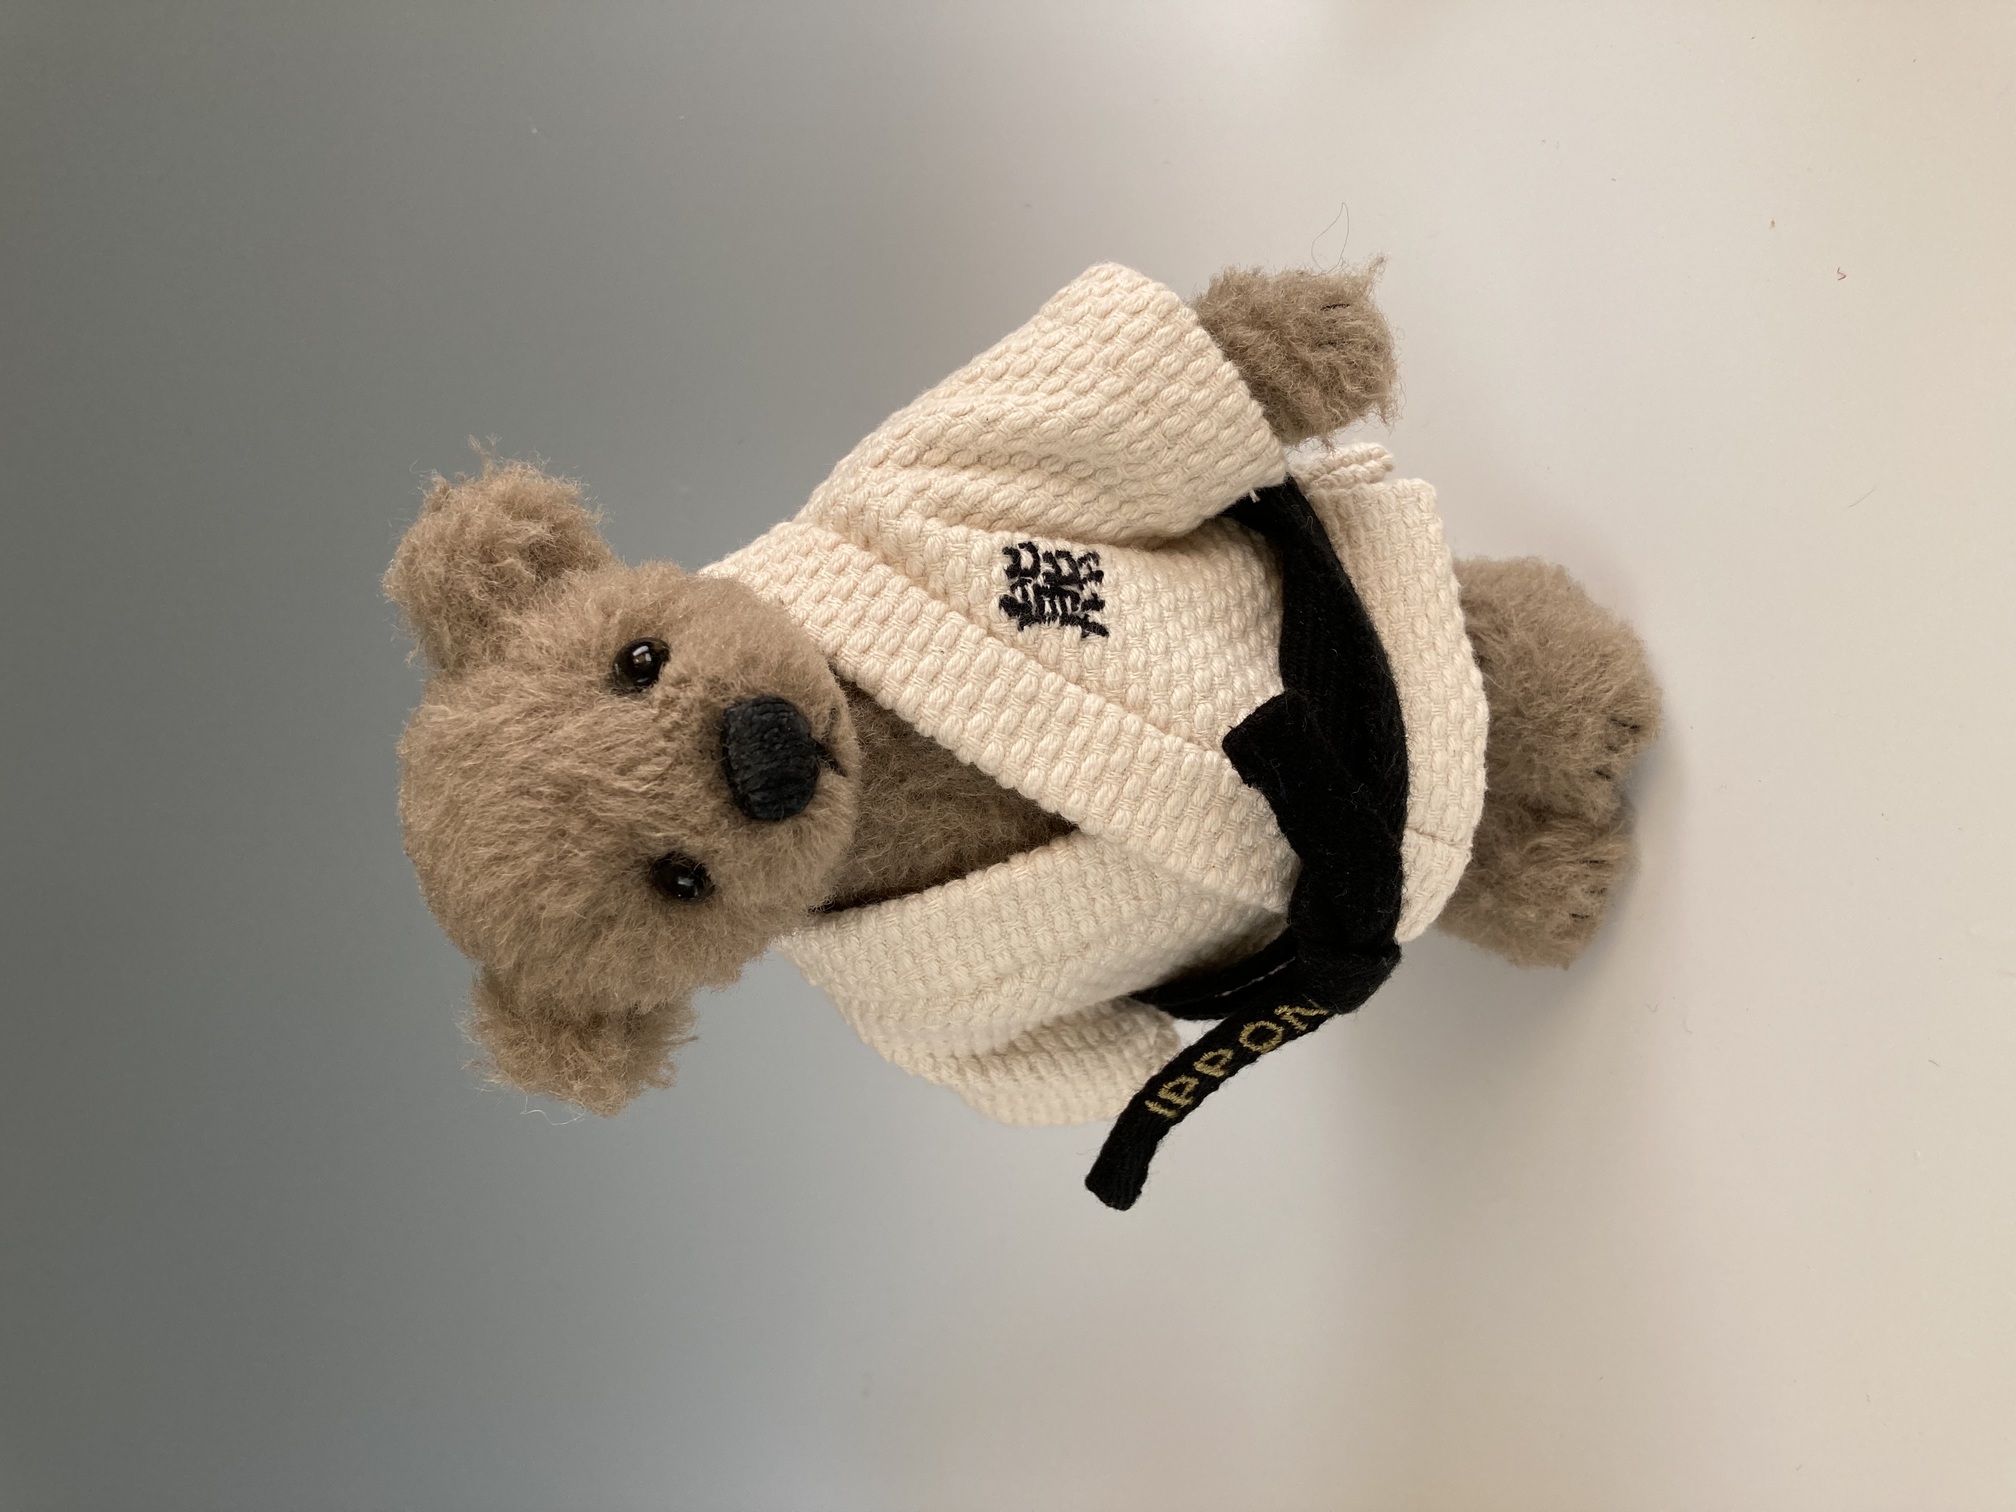 Teddy, 7 inches bear made from wool, wearing judogi.